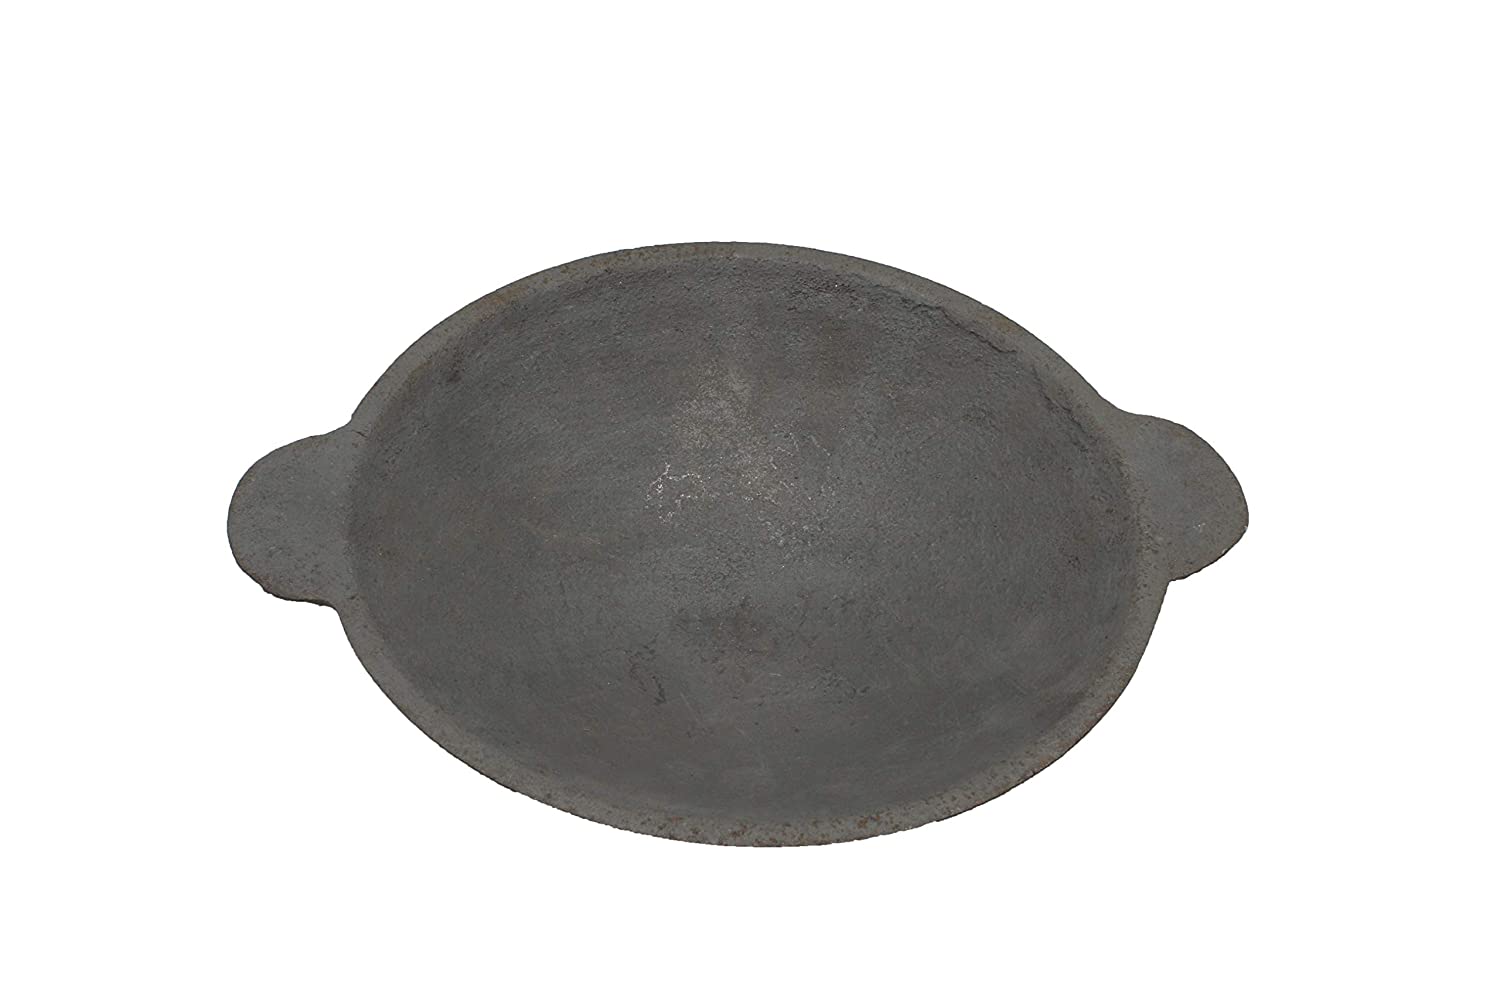 Pre-Seasoned Cast Iron Appe Pan – Flat Base-Gas/Electric/Induction/Ceramic  Stove Friendly – Earth & Ethics Home